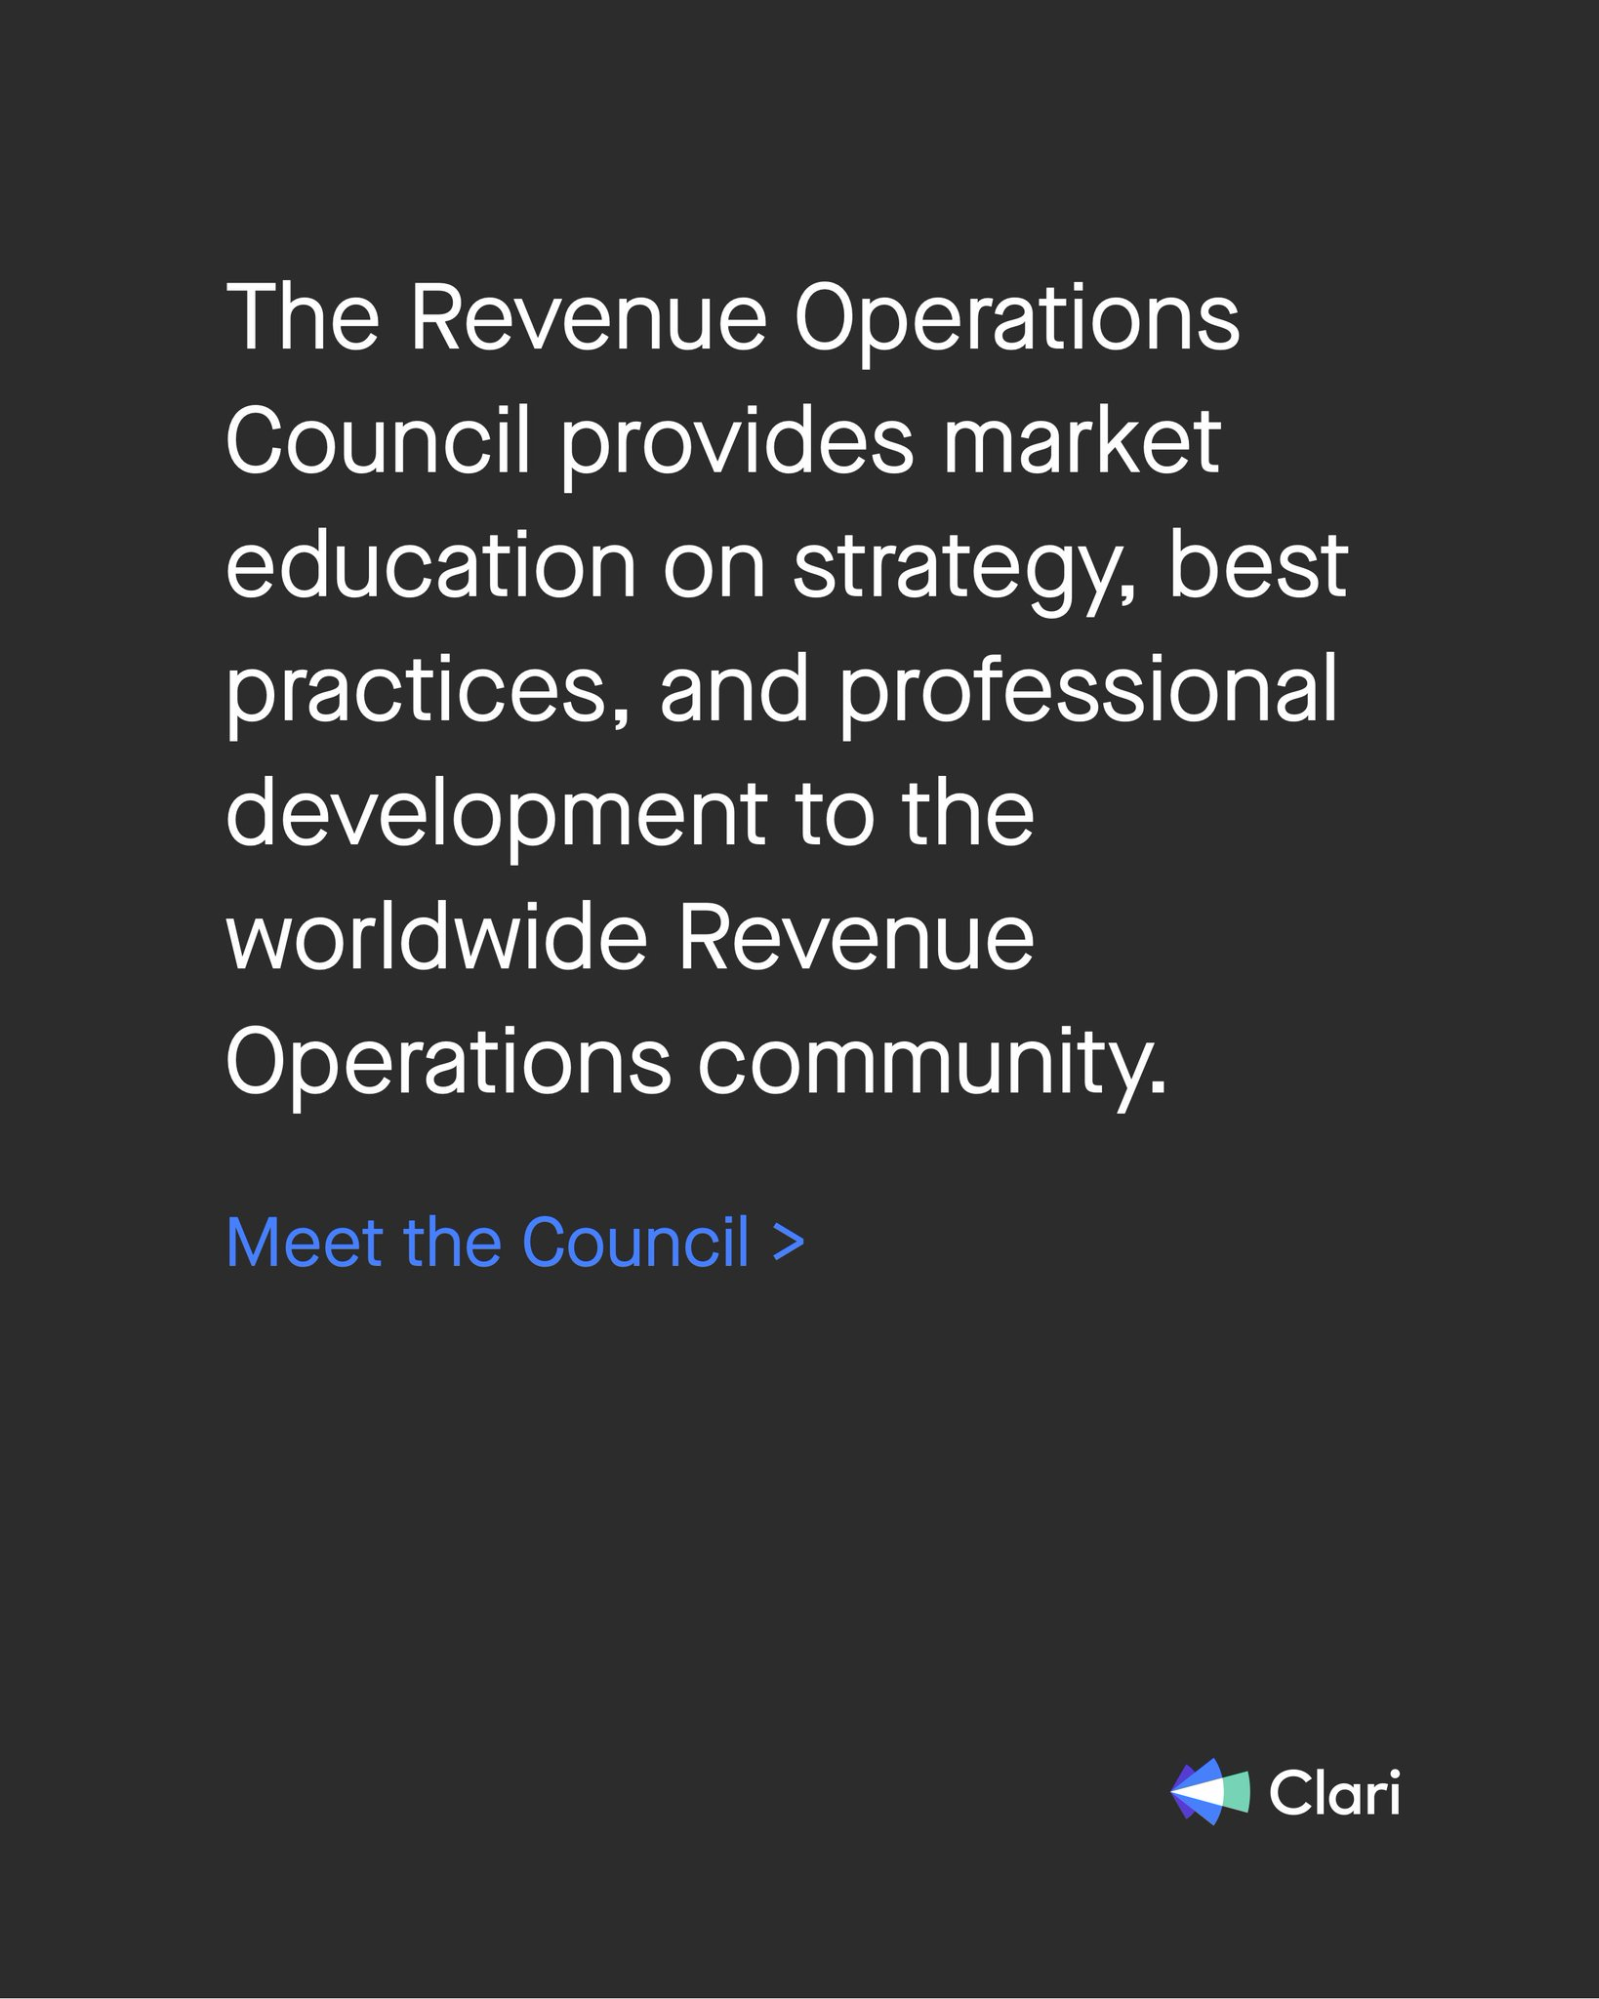 The Revenue Operations Council provides market education on strategy, best practices, and professional development to the worldwide Revenue Operations community.